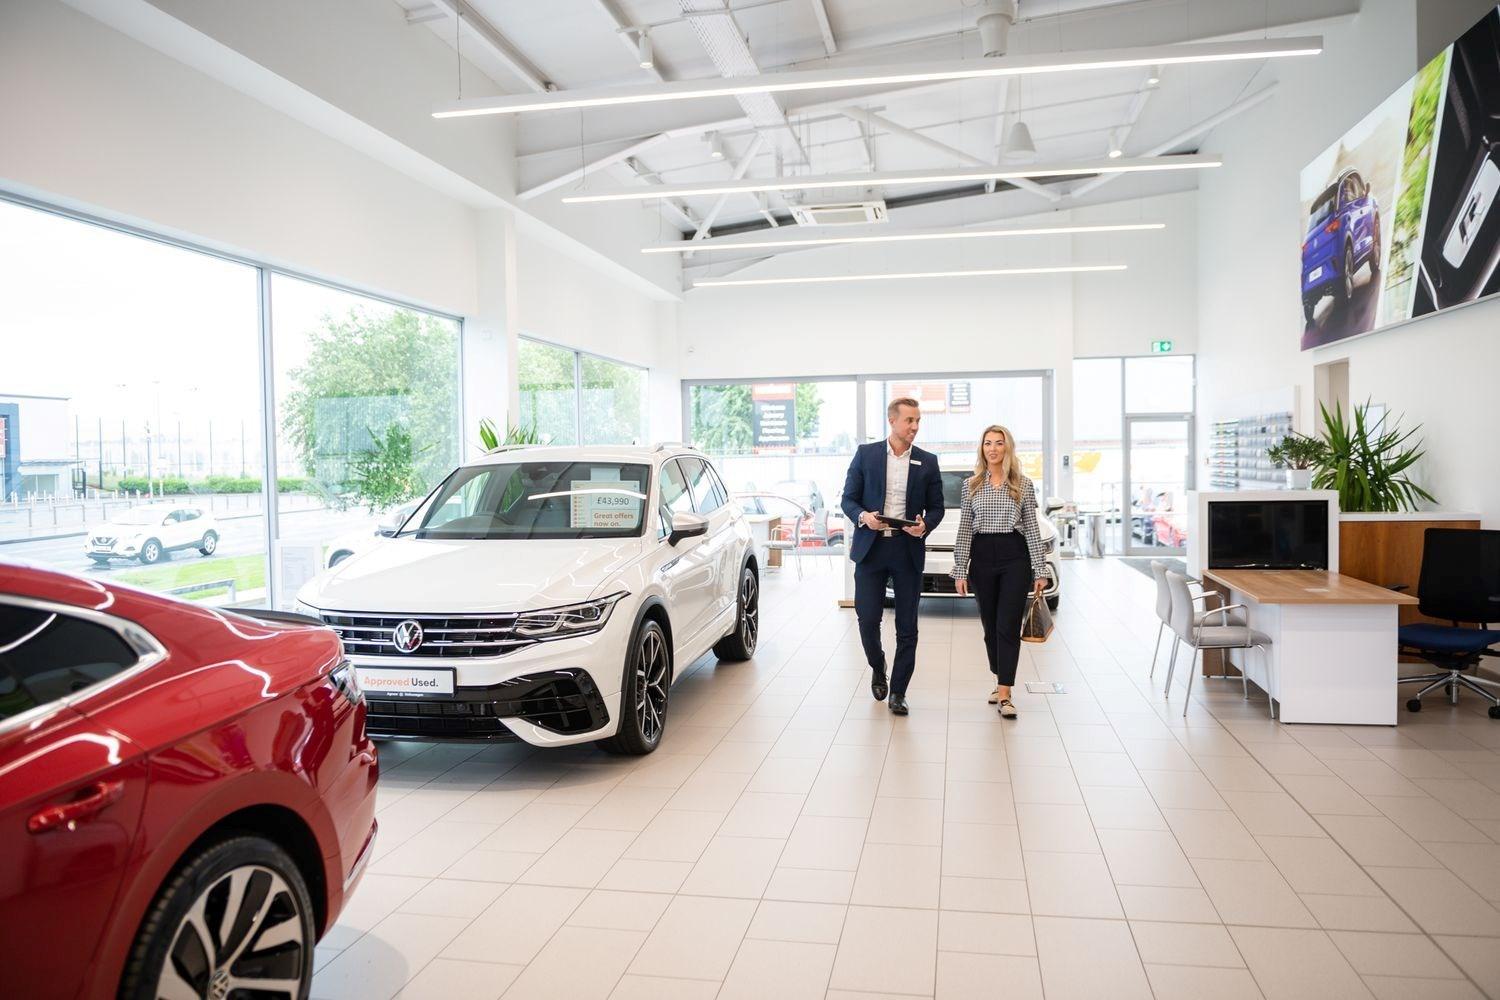 Volkswagen Finance Specialist talks to customer about the different finance packages available for different Volkswagen vehicles as they walk through the showroom at Agnew Volkswagen Mallusk.